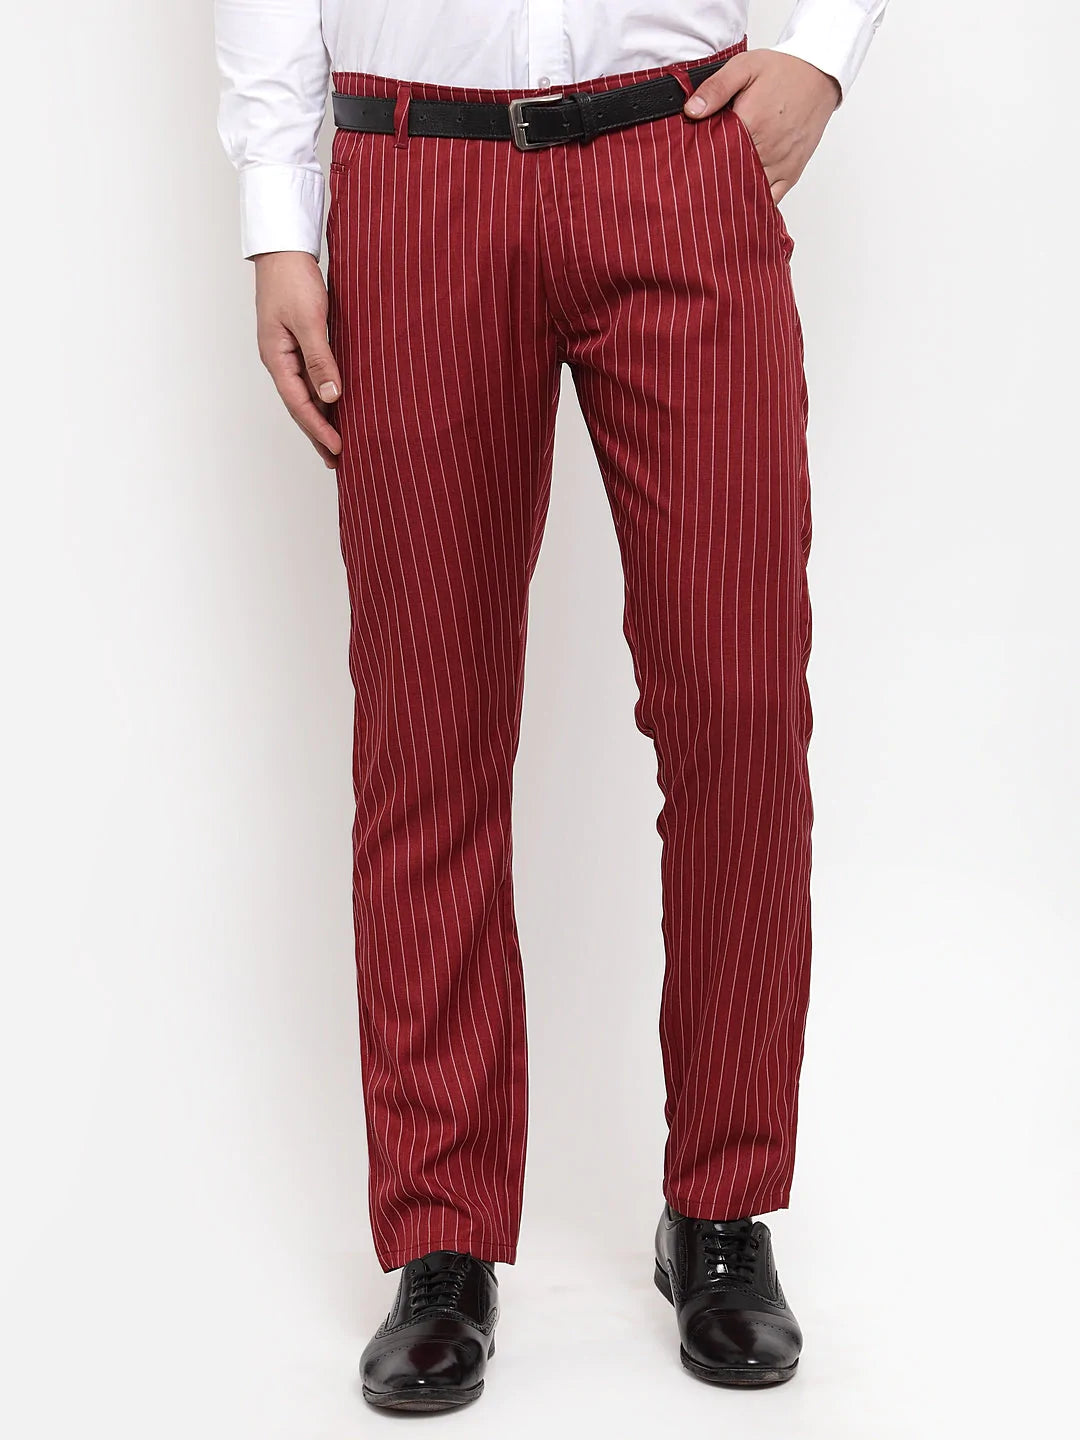 Jainish Men's Red Cotton Striped Formal Trousers ( FGP 255Maroon )